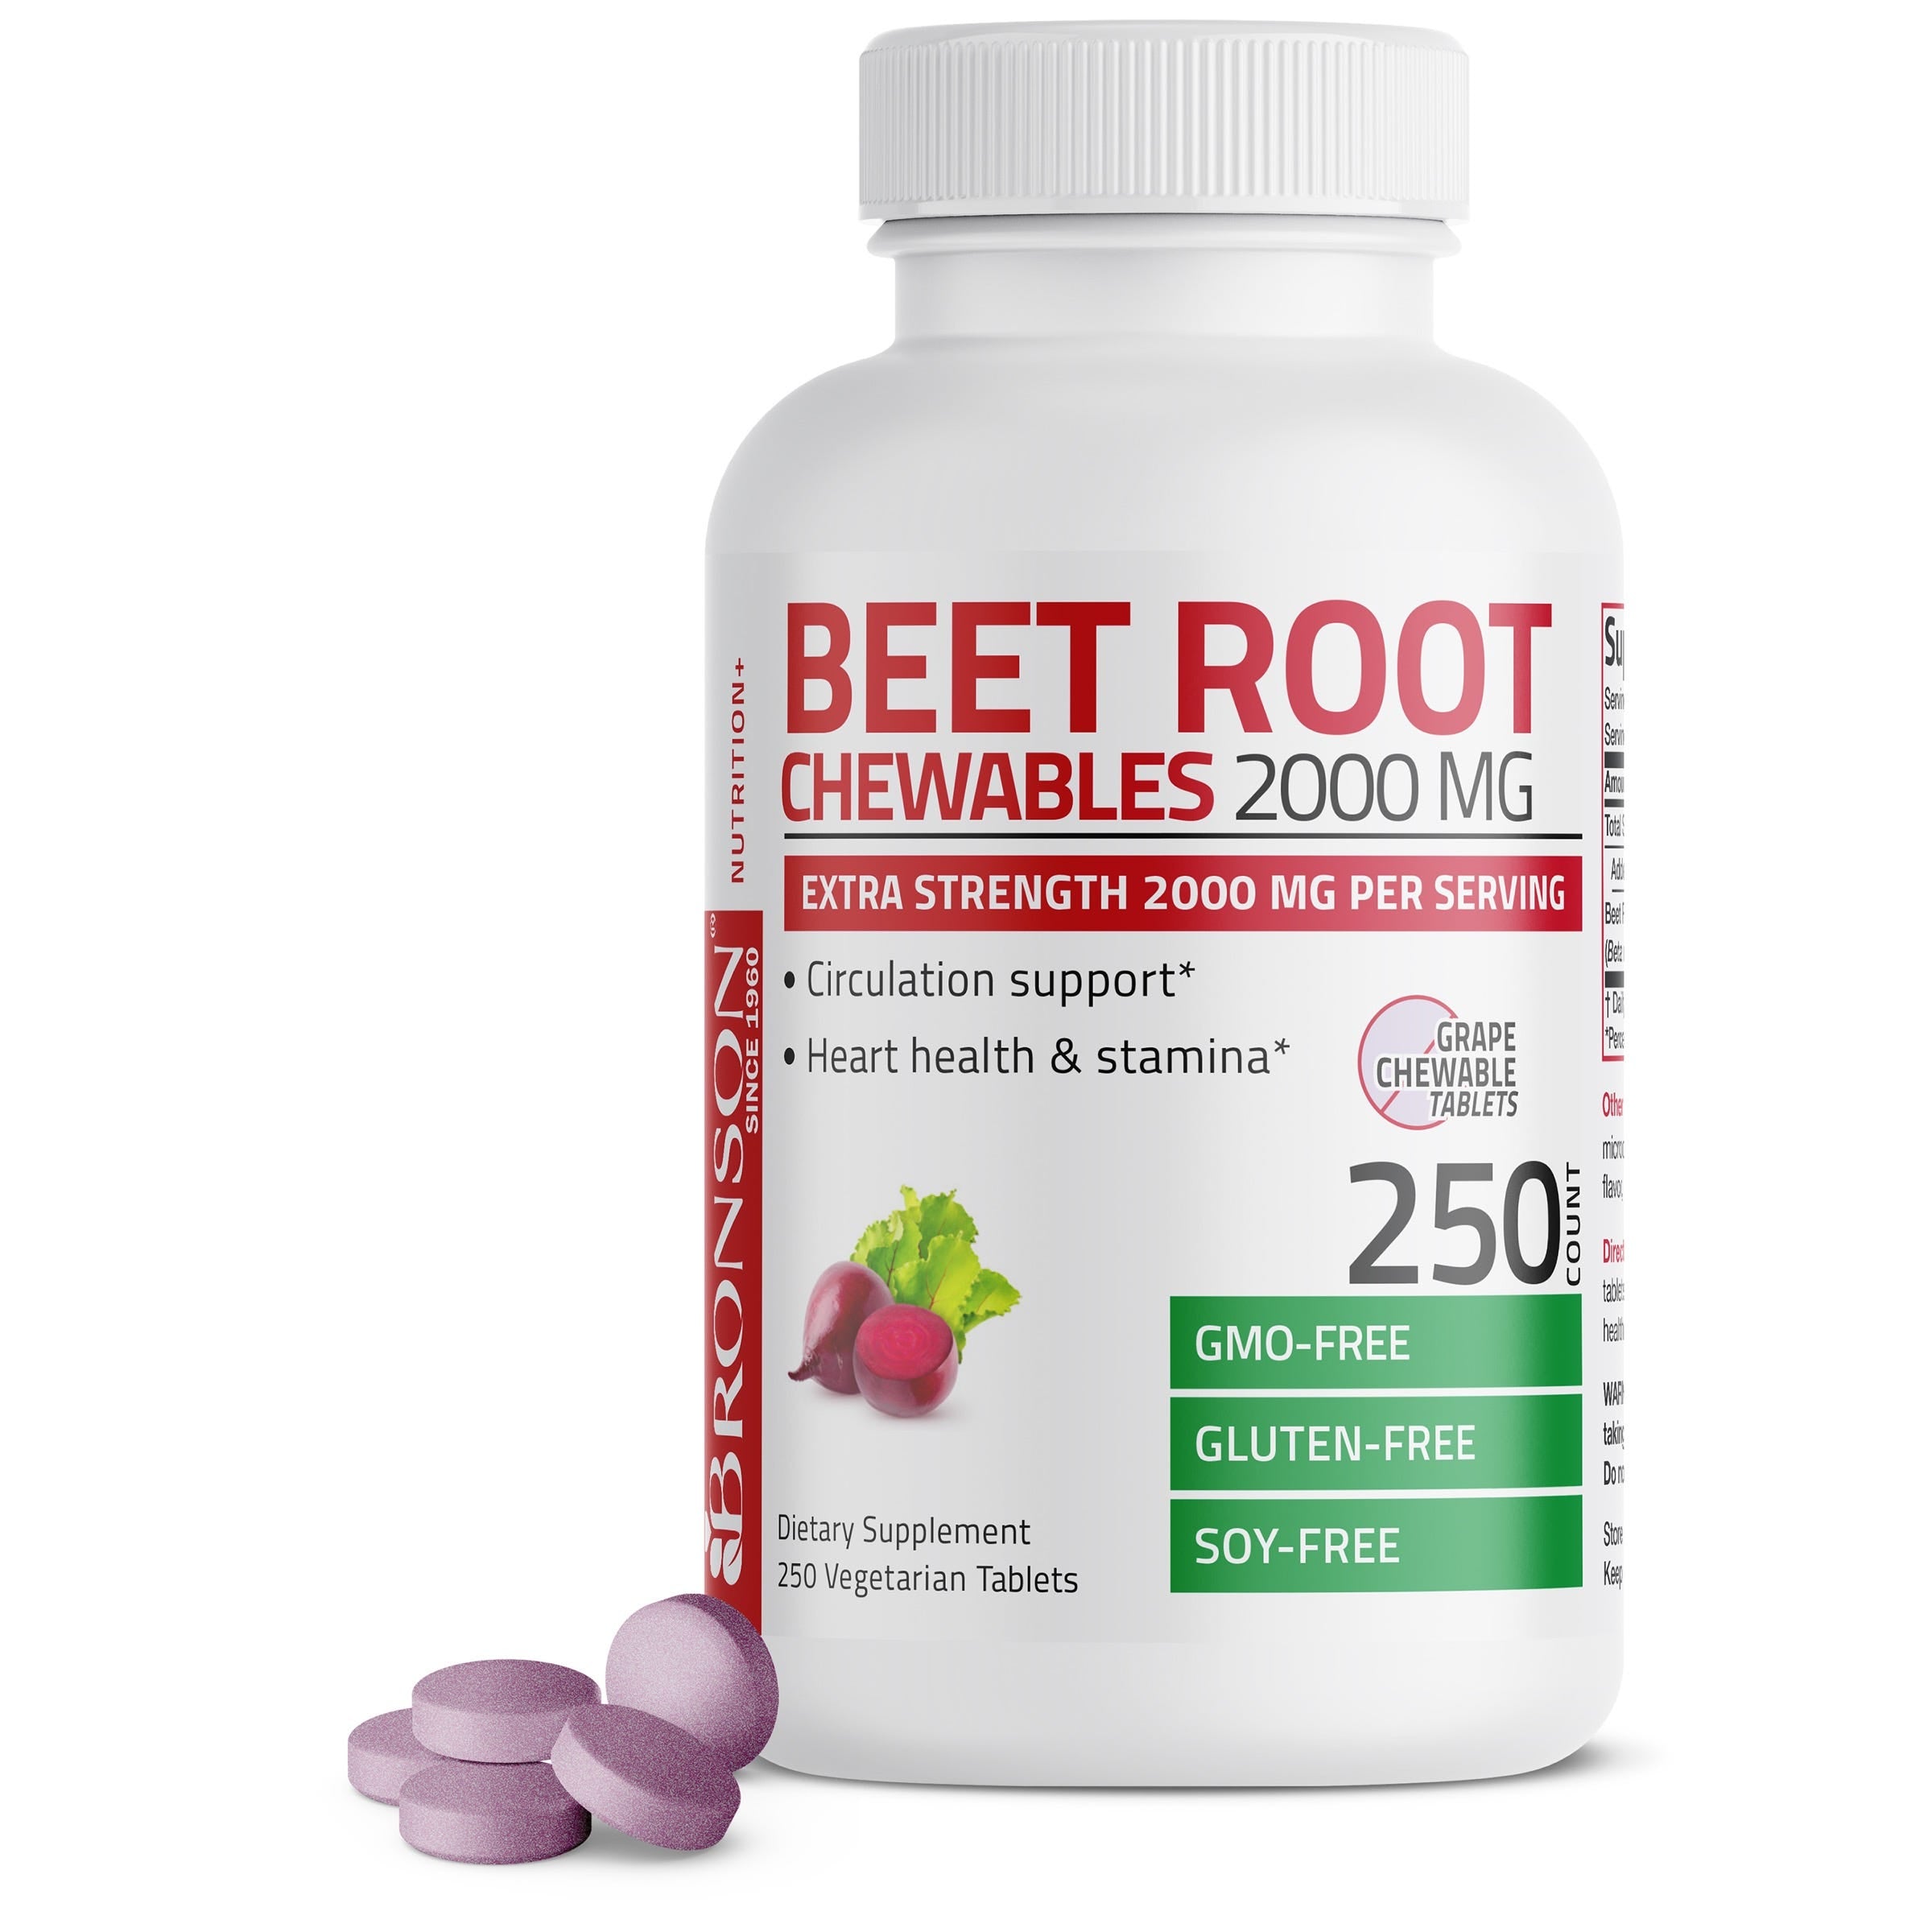 Beet Root Chewables 2000 MG, 250 Grape Flavored Tablets view 1 of 6